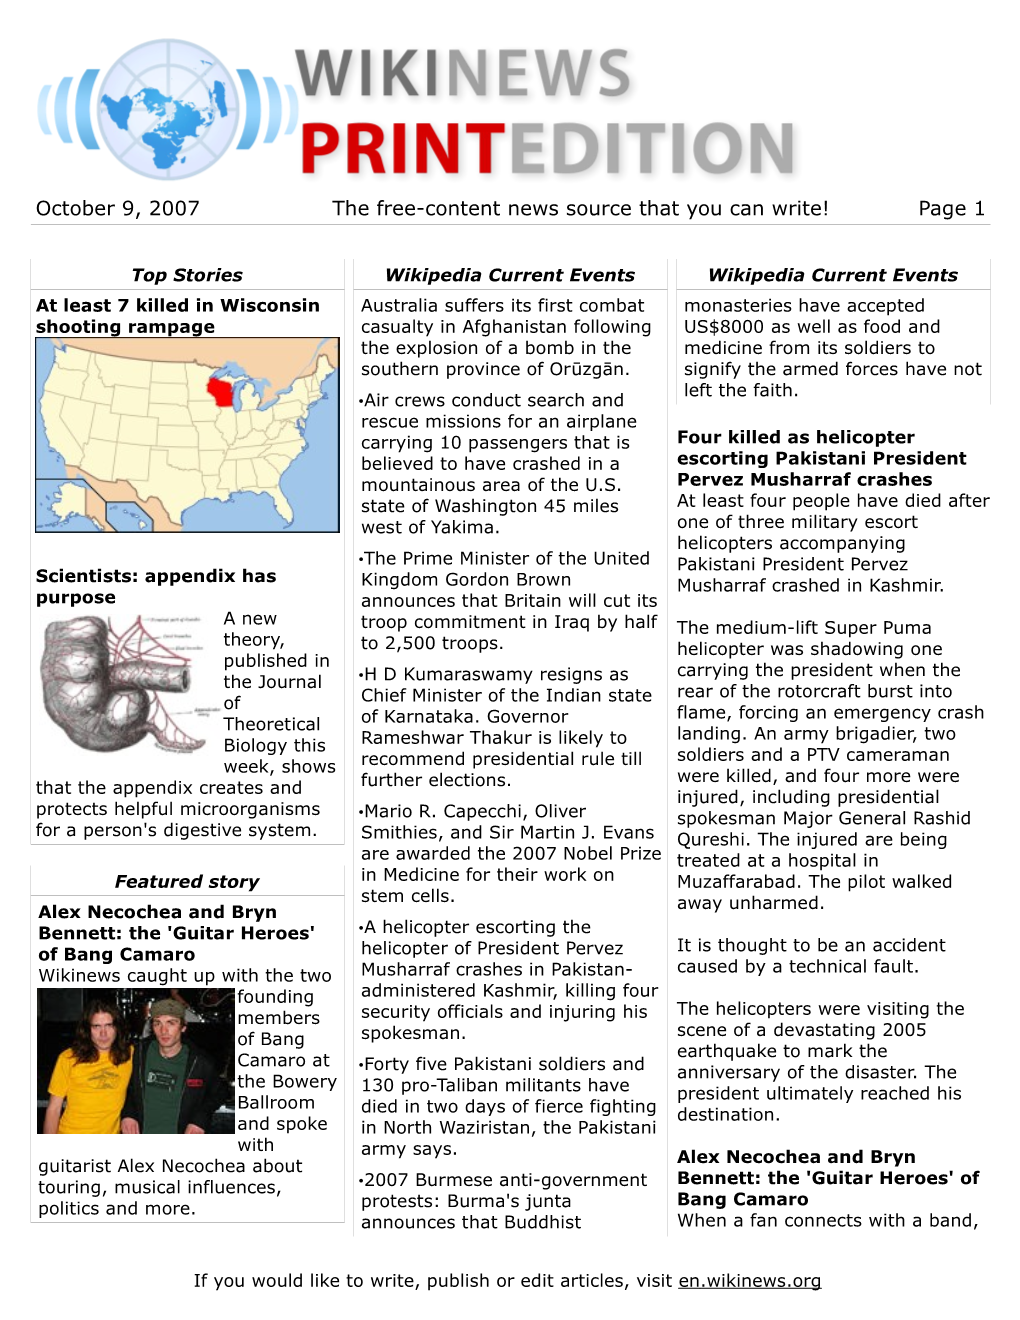 October 9, 2007 the Free-Content News Source That You Can Write! Page 1